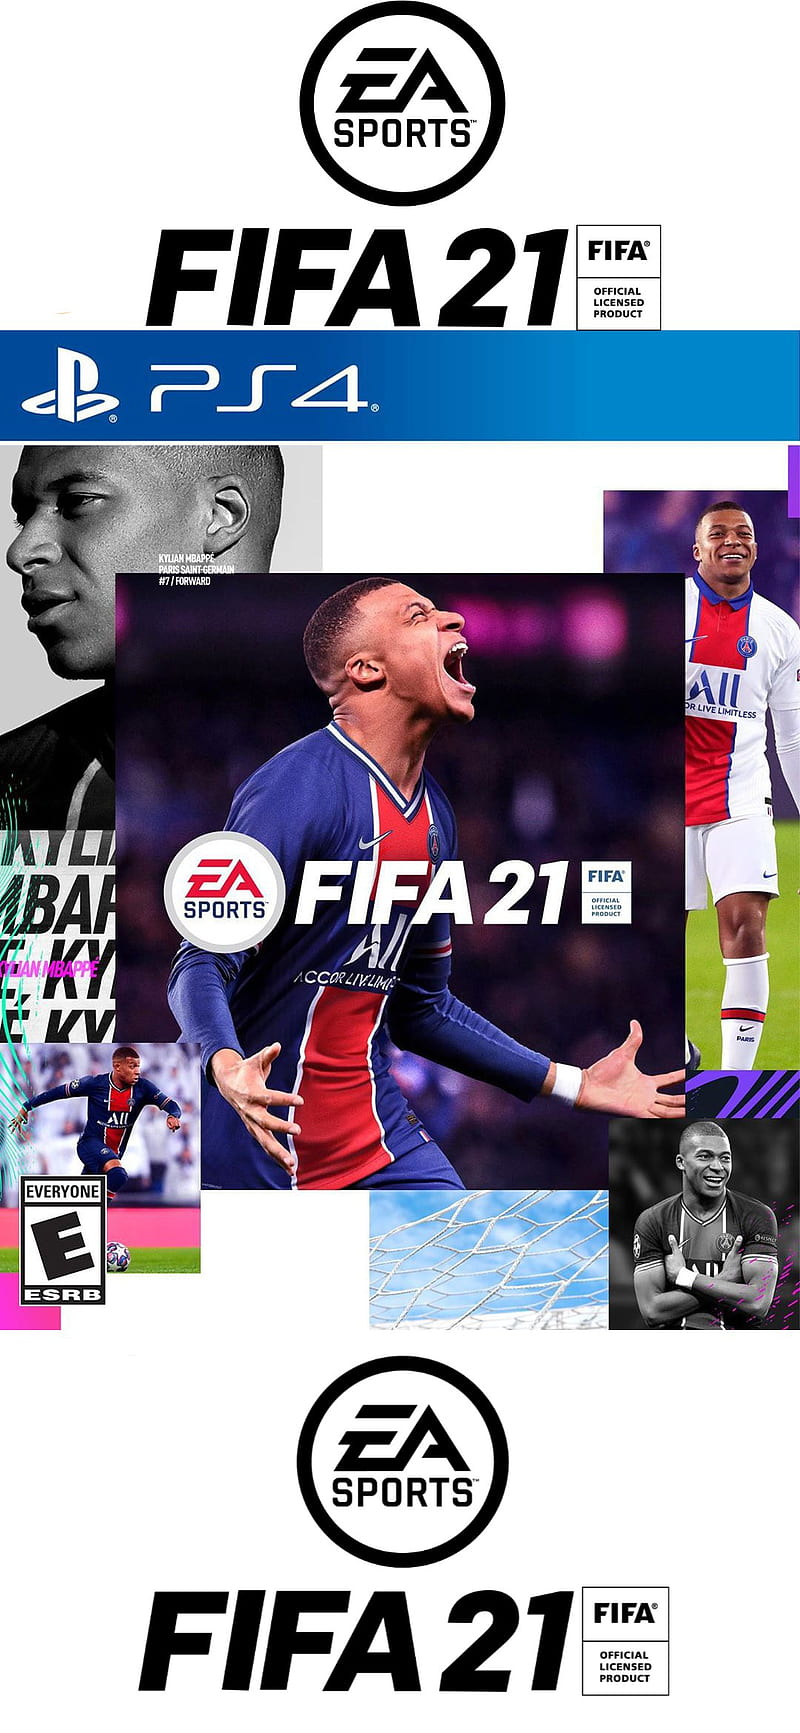 Download Fifa 21 wallpapers for mobile phone, free Fifa 21 HD pictures